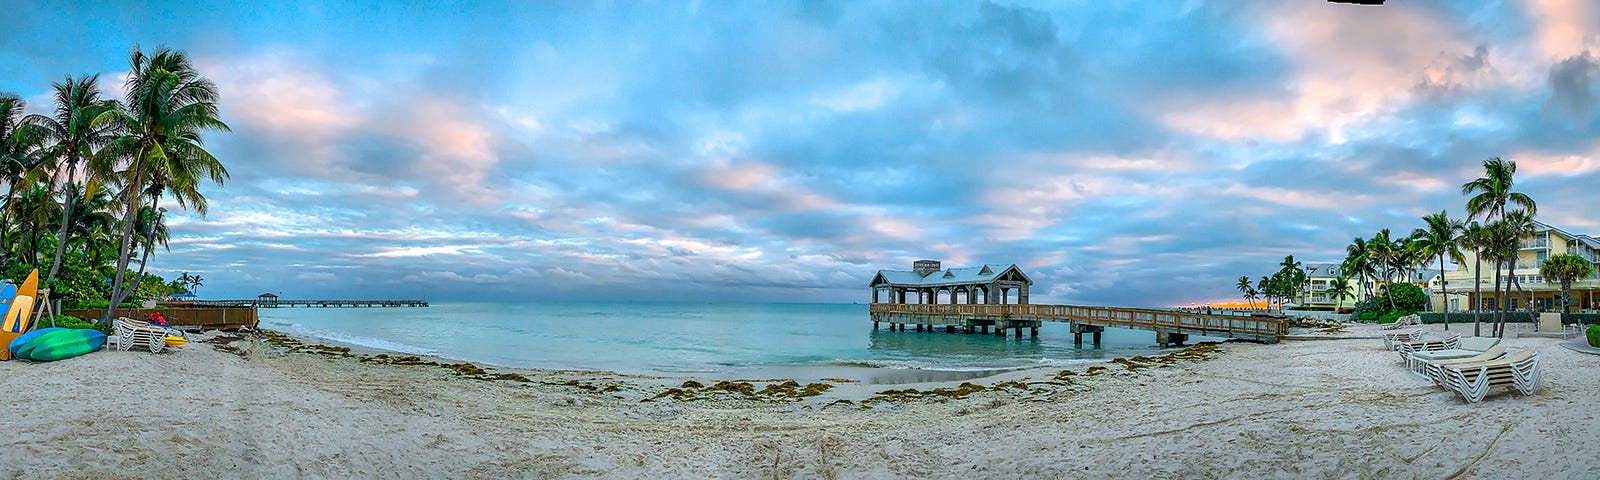 The sandy beach and and pier at The Reach Key West at sunset — just steps from our lodging.